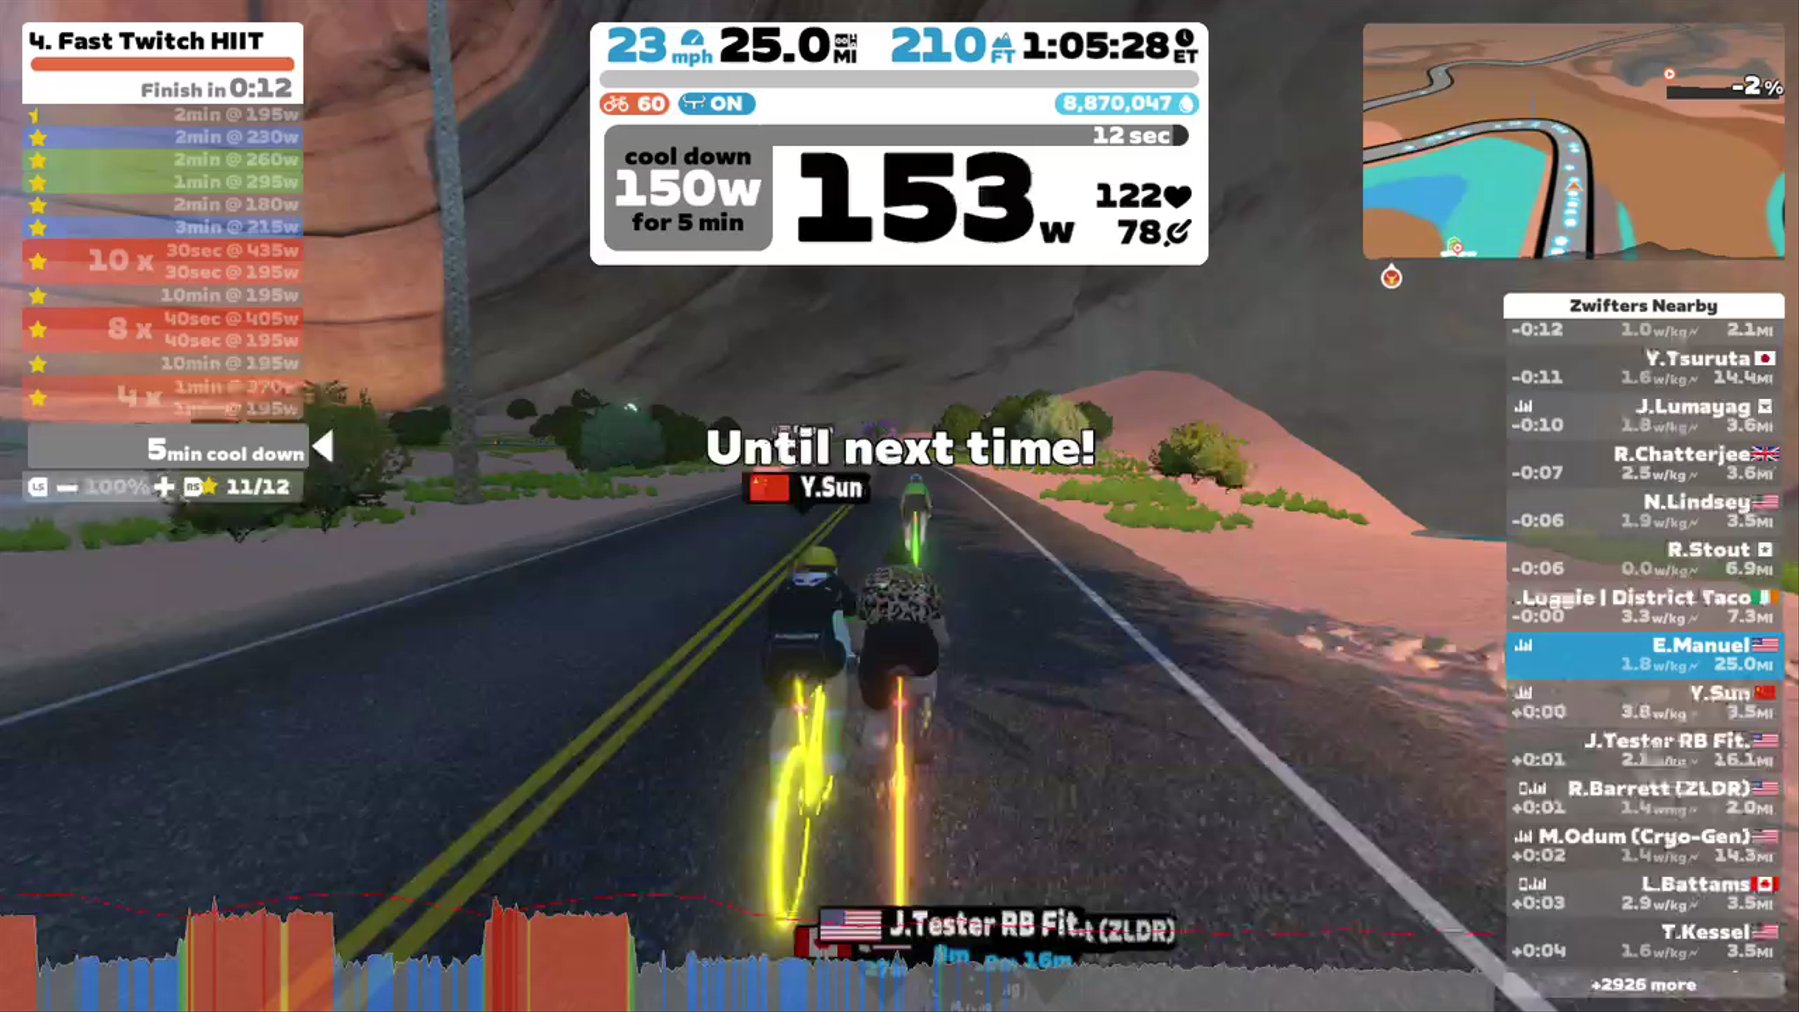 Zwift - Zwift Academy: Workout 4 | Fast Twitch HIIT in Watopia